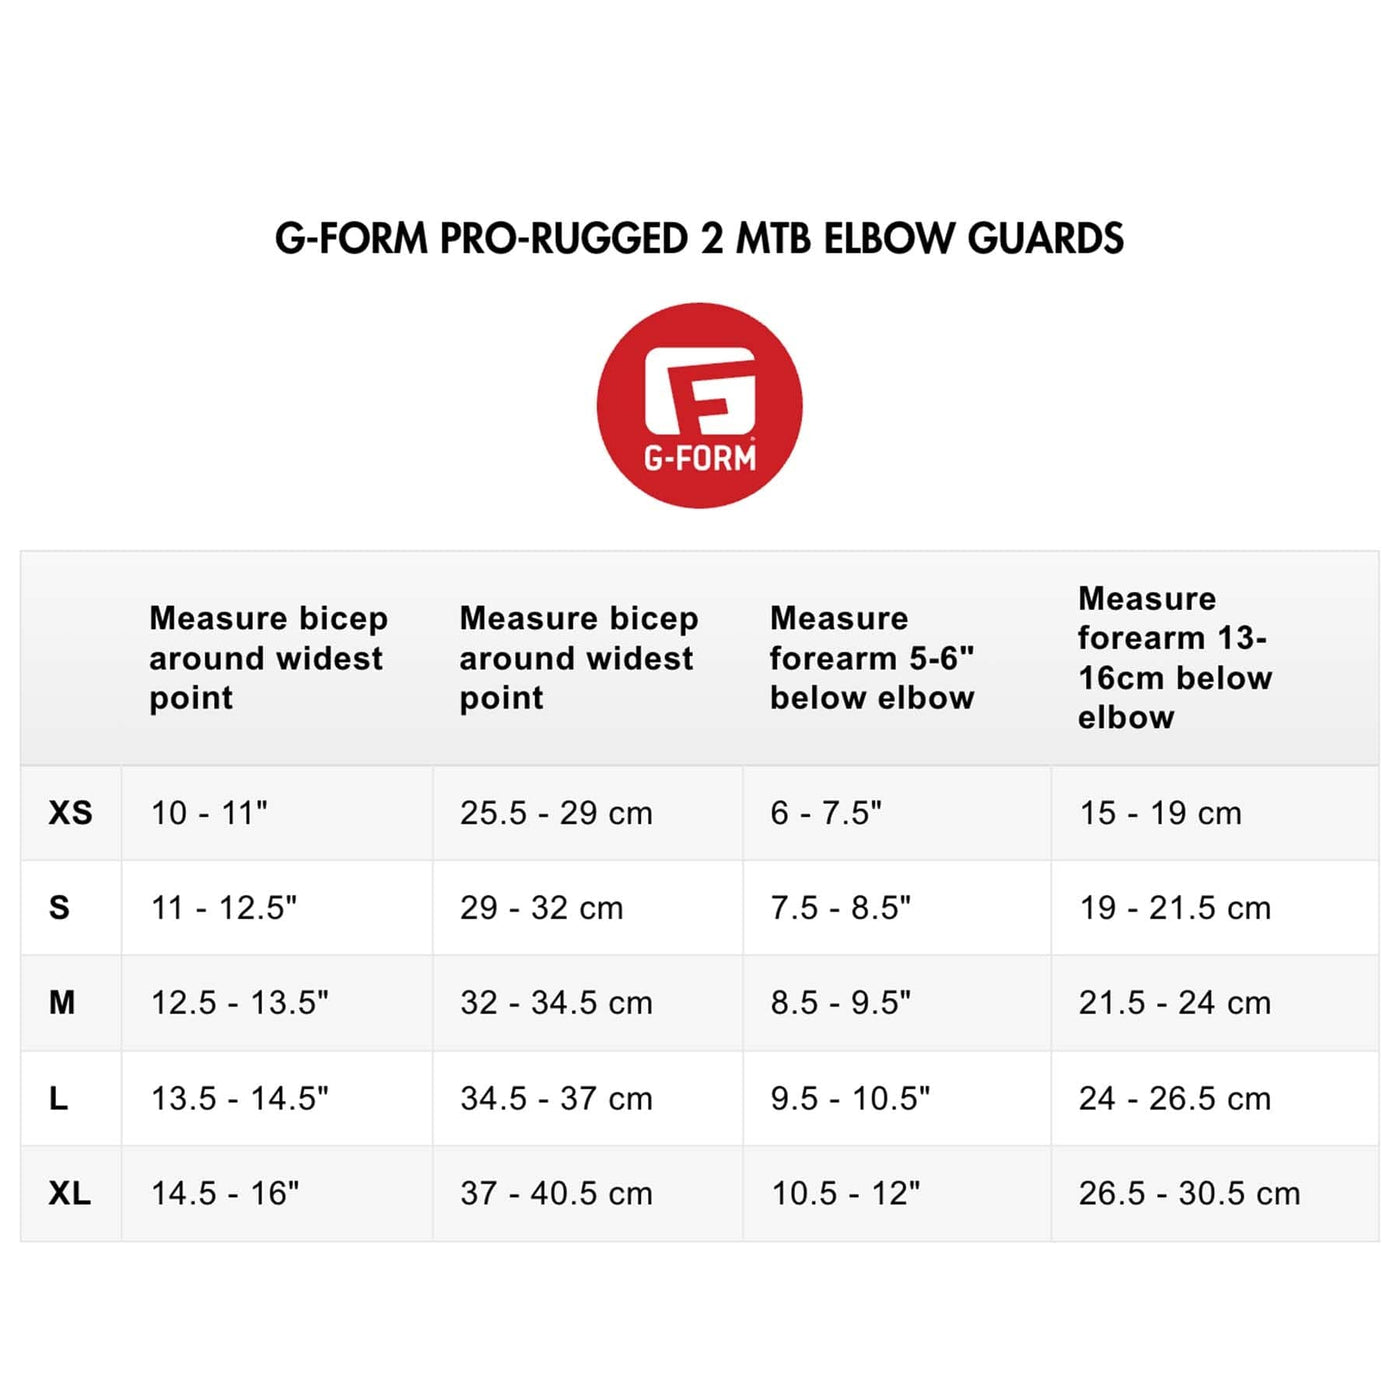 G-FORM PRO-RUGGED 2 MTB ELBOW GUARDS SIZE CHART 